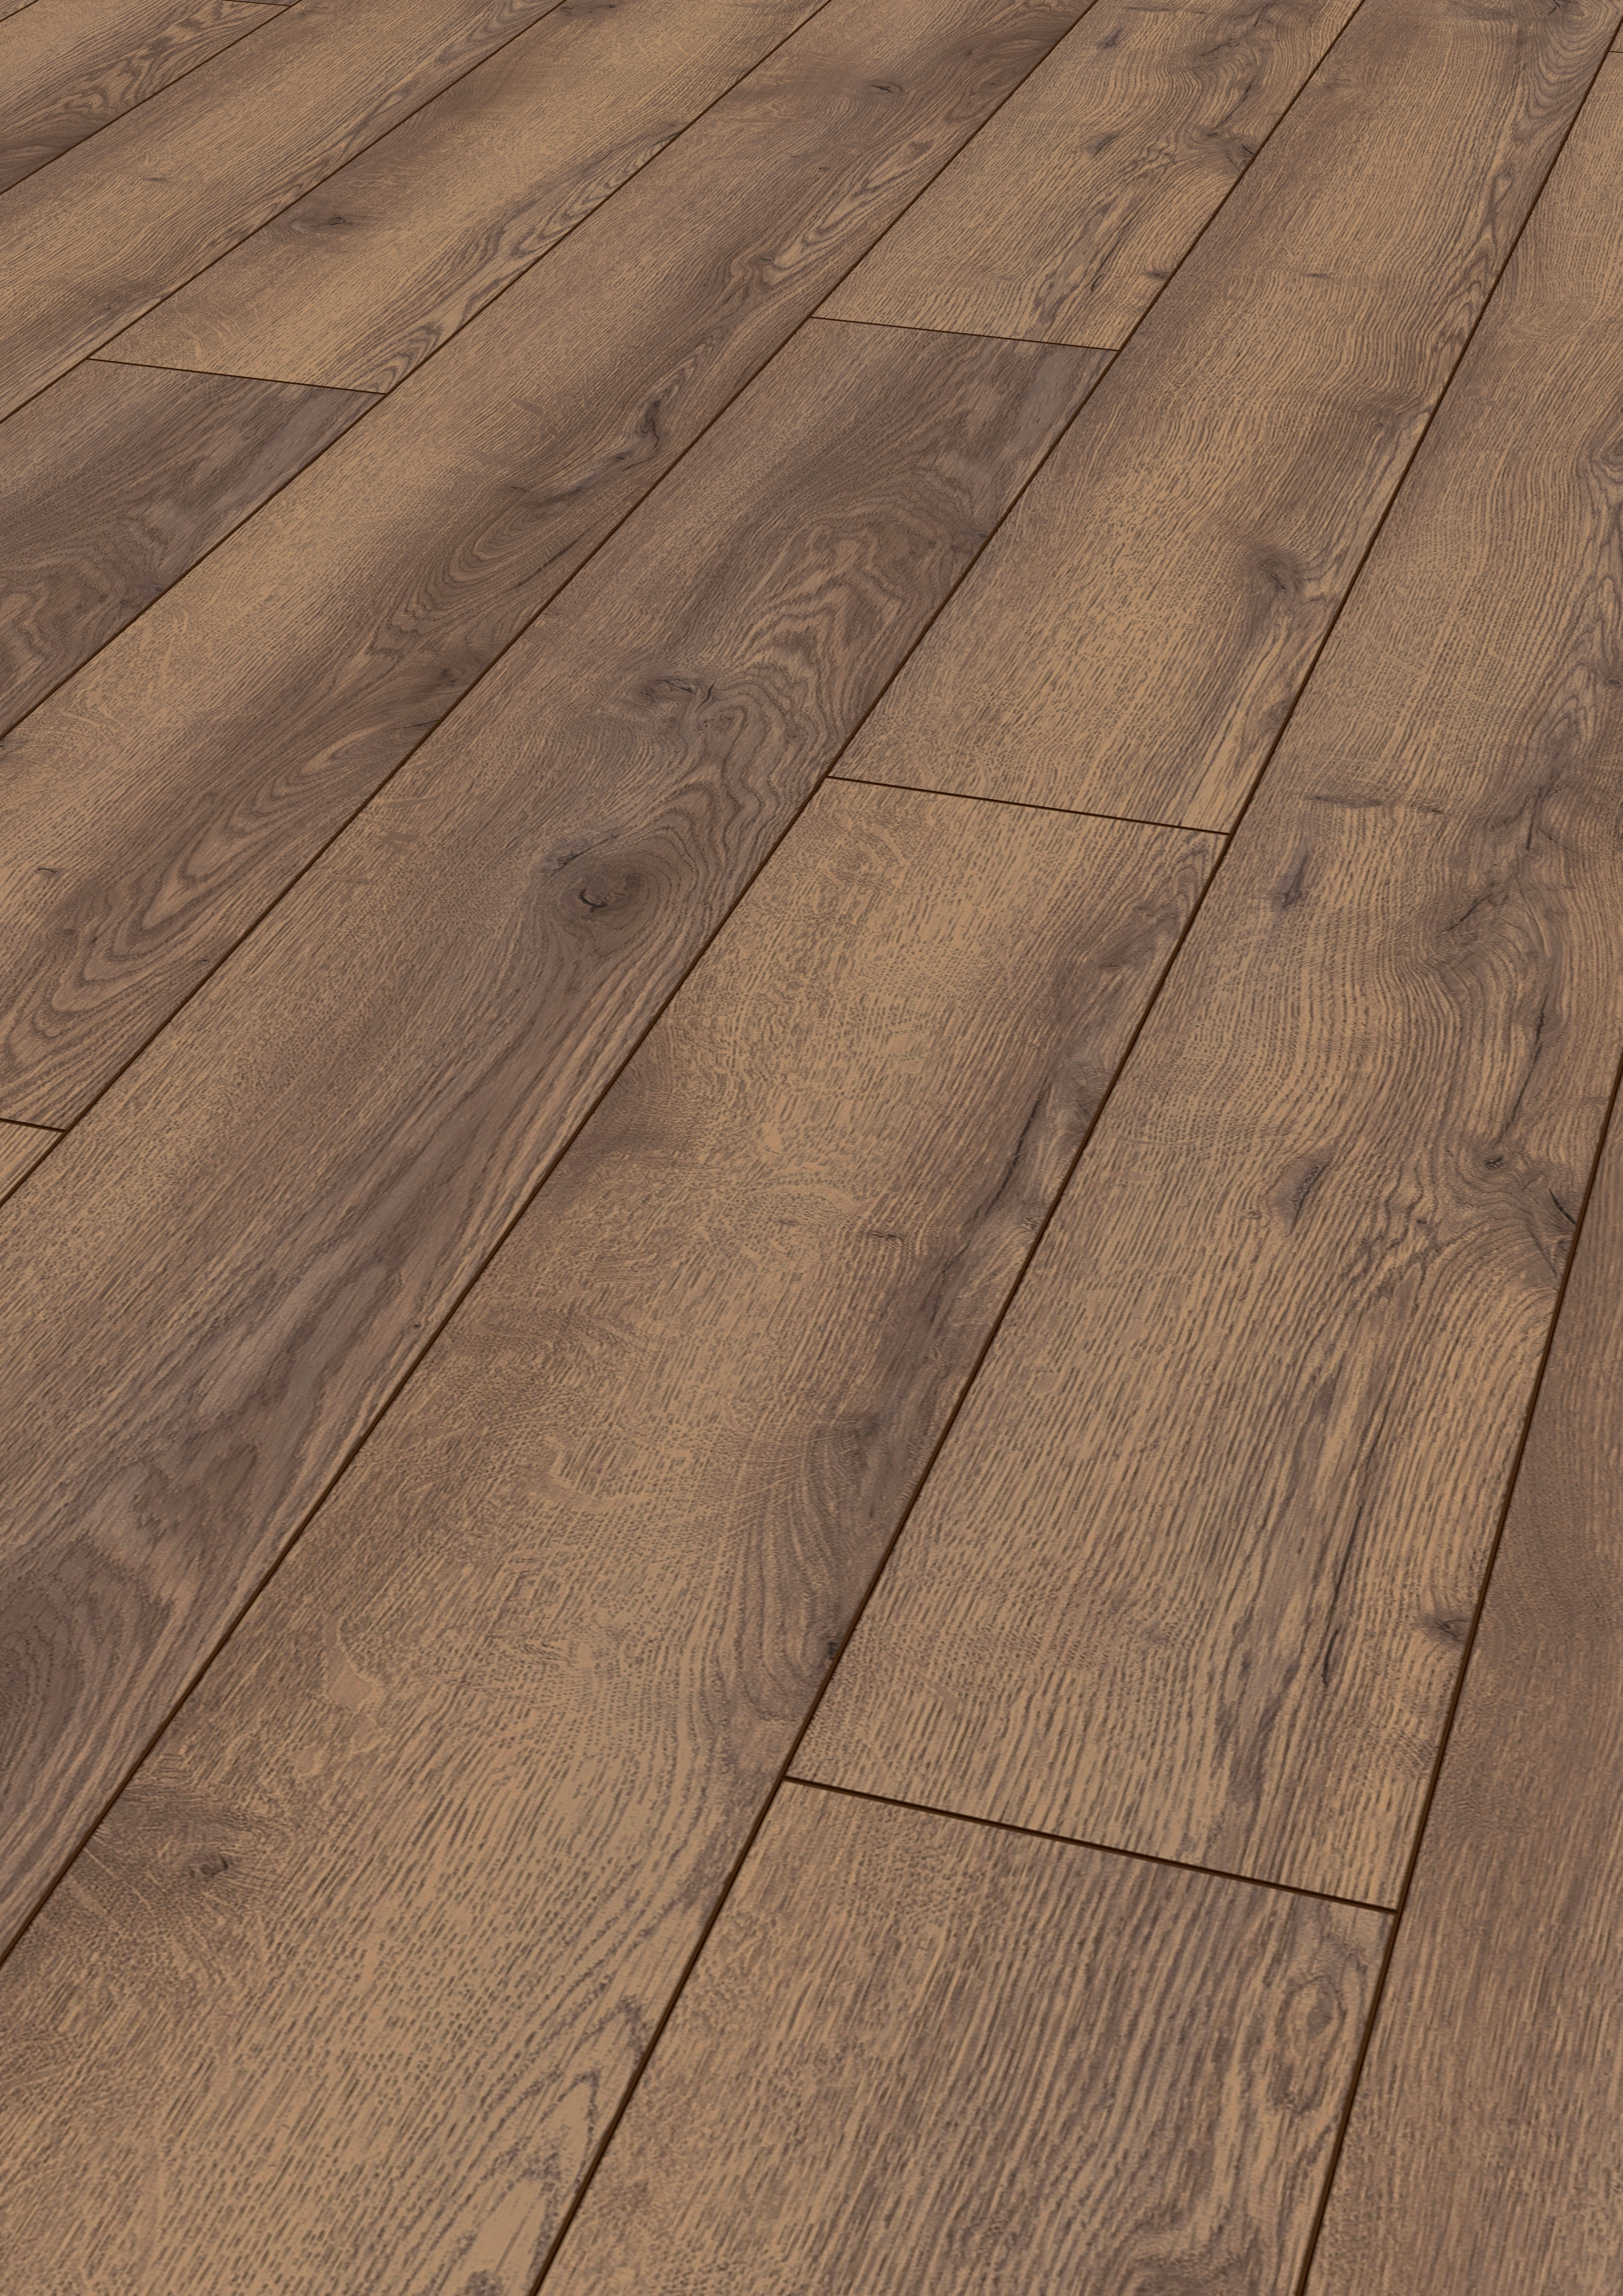 20 Unique Engineered Hardwood Flooring Vs Laminate Flooring 2024 free download engineered hardwood flooring vs laminate flooring of mammut laminate flooring in country house plank style kronotex inside download picture amp